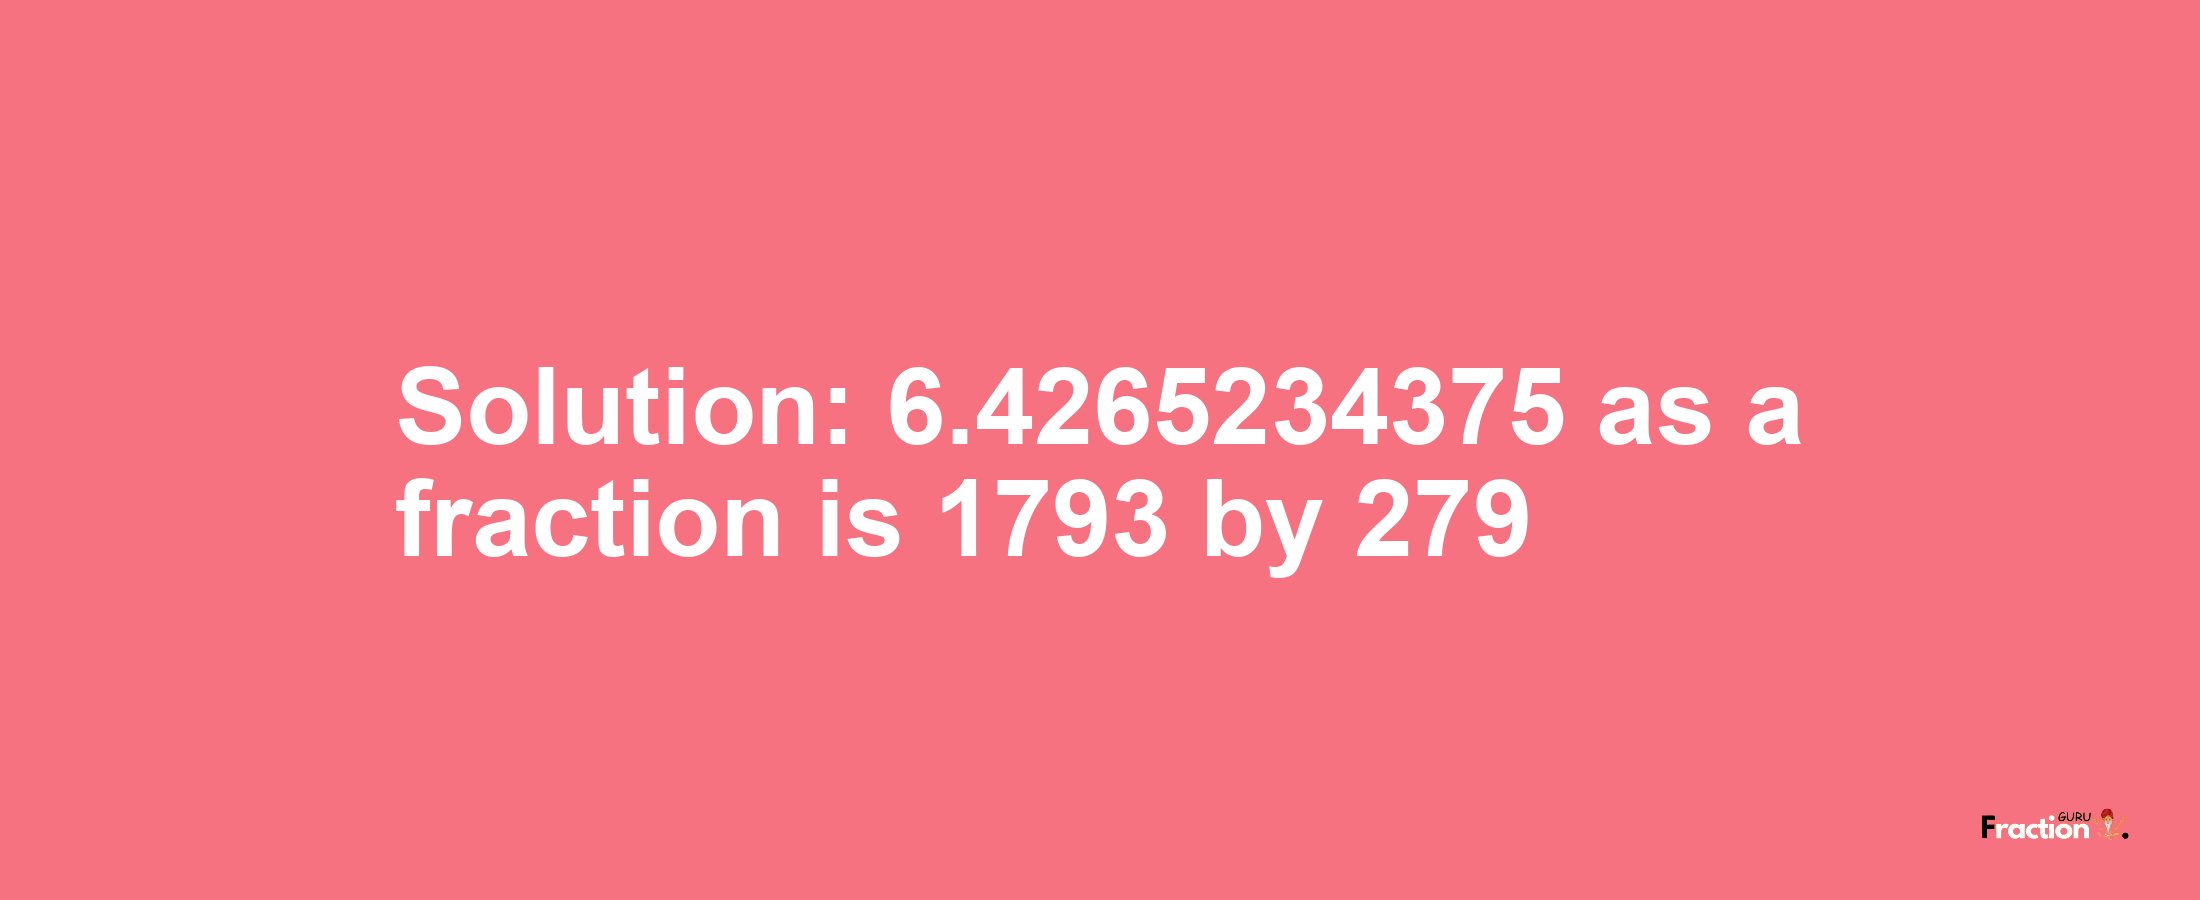 Solution:6.4265234375 as a fraction is 1793/279